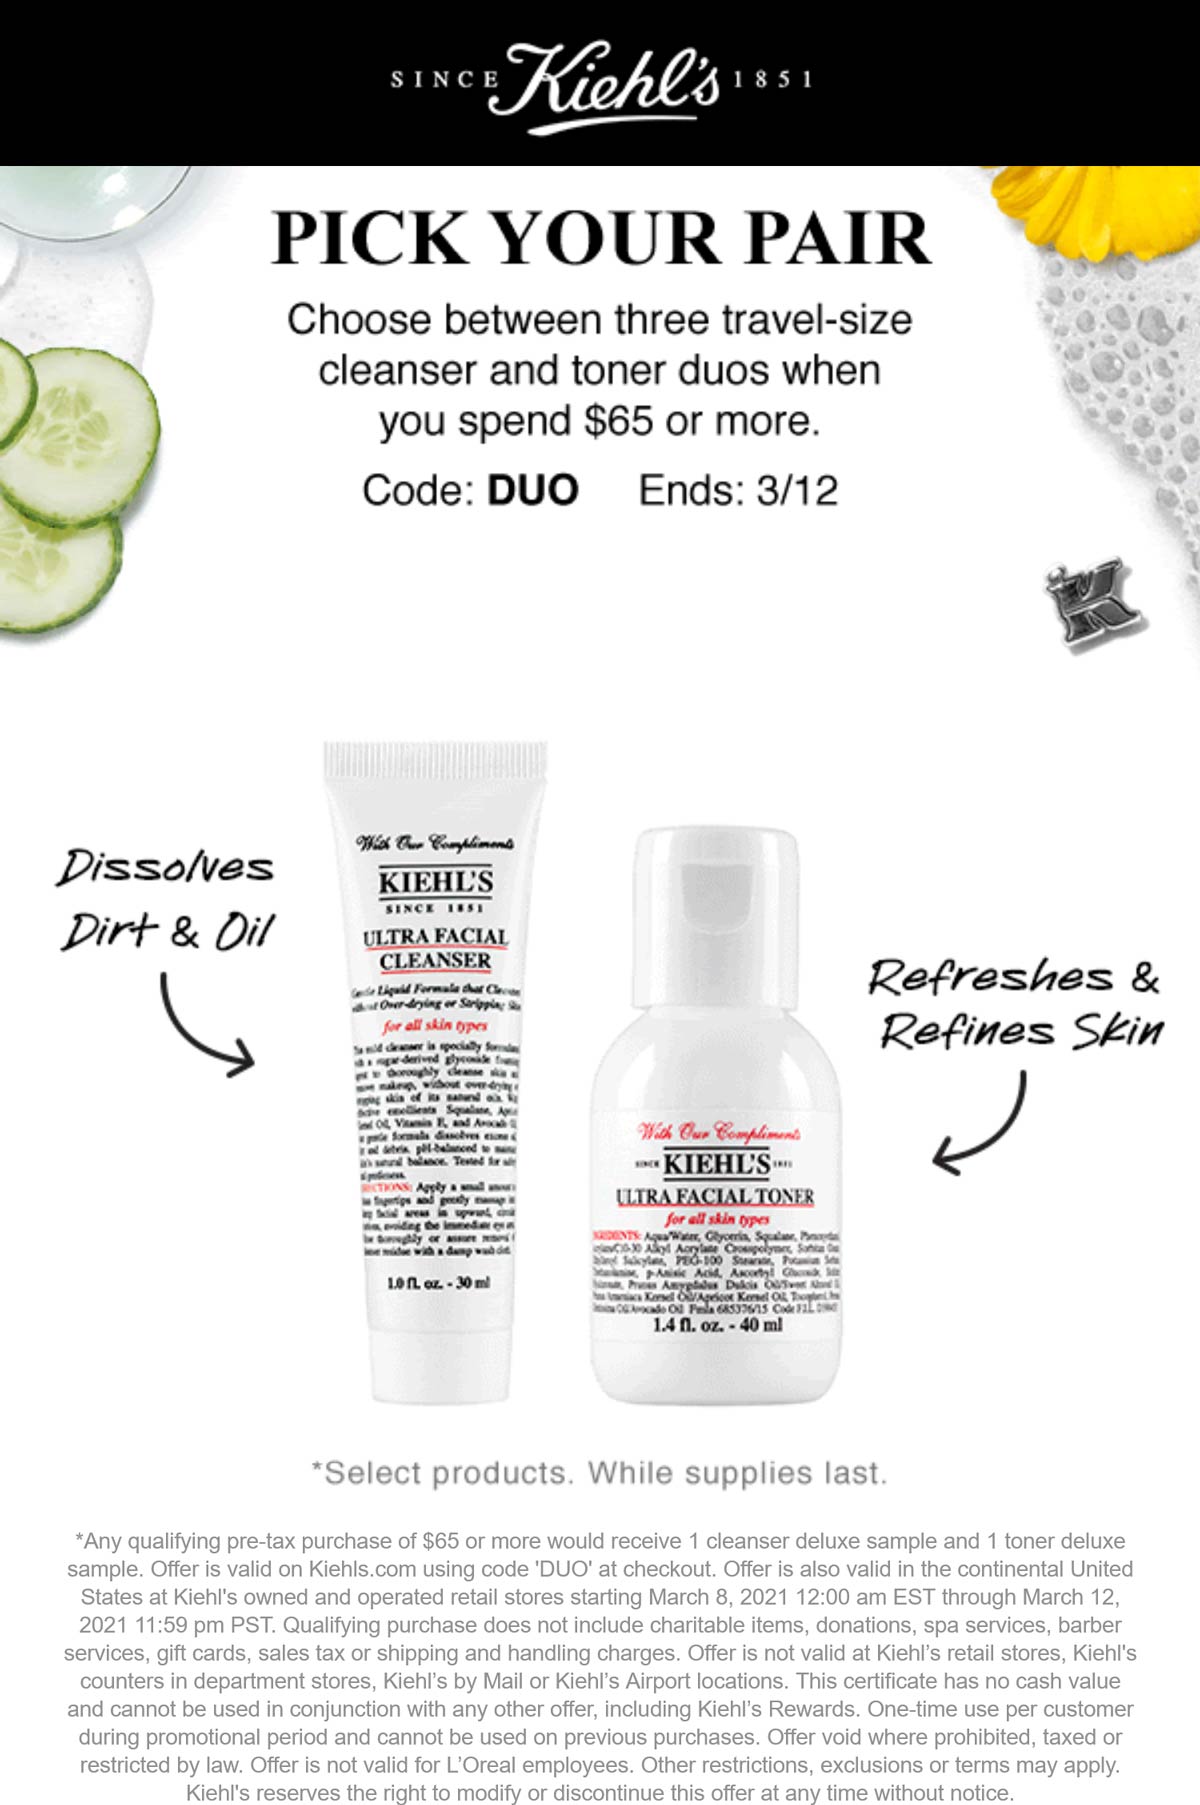 Kiehls stores Coupon  Cleanser & toner duo free with $65 spent at Kiehls, or online via promo code DUO #kiehls 